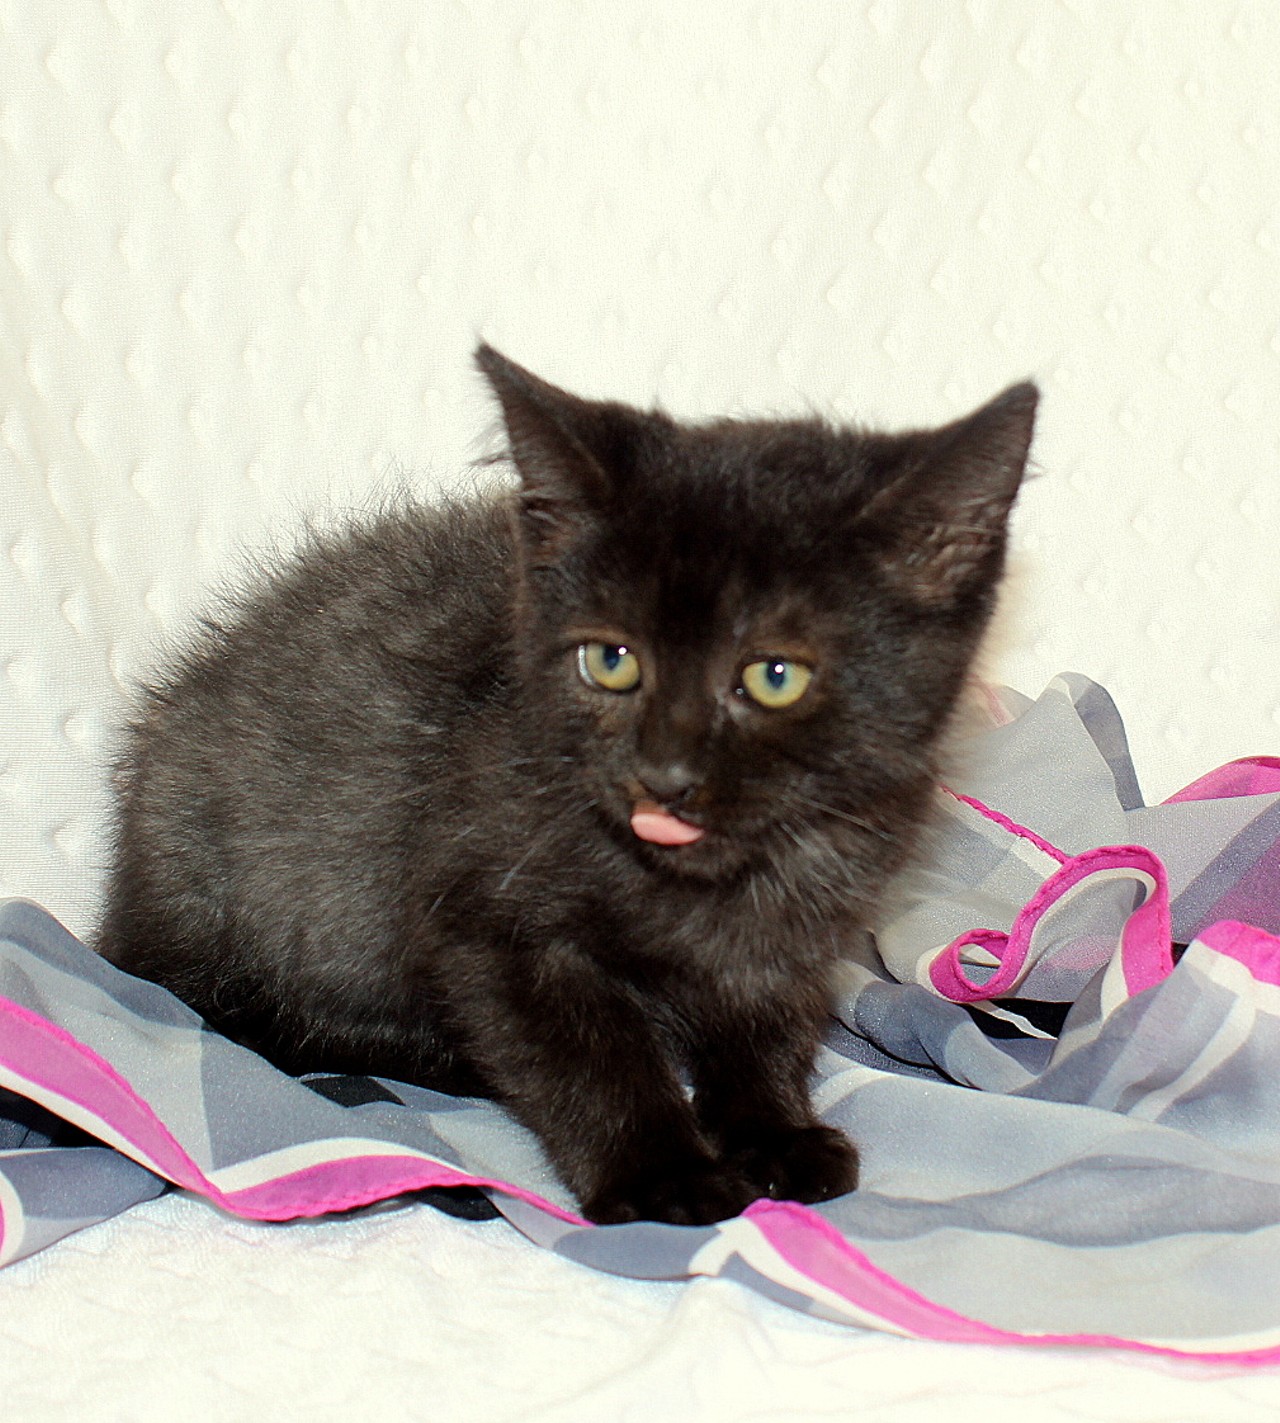 NAME: Annabelle 
GENDER:  Female
BREED:  Domestic Short Hair
AGE:  10 weeks
WEIGHT:  2.5 pounds
SPECIAL CONSIDERATIONS:  None
REASON I CAME TO MHS:  Homeless in Hamtramck
LOCATION:  PetSmart of Roseville
ID NUMBER:  870822